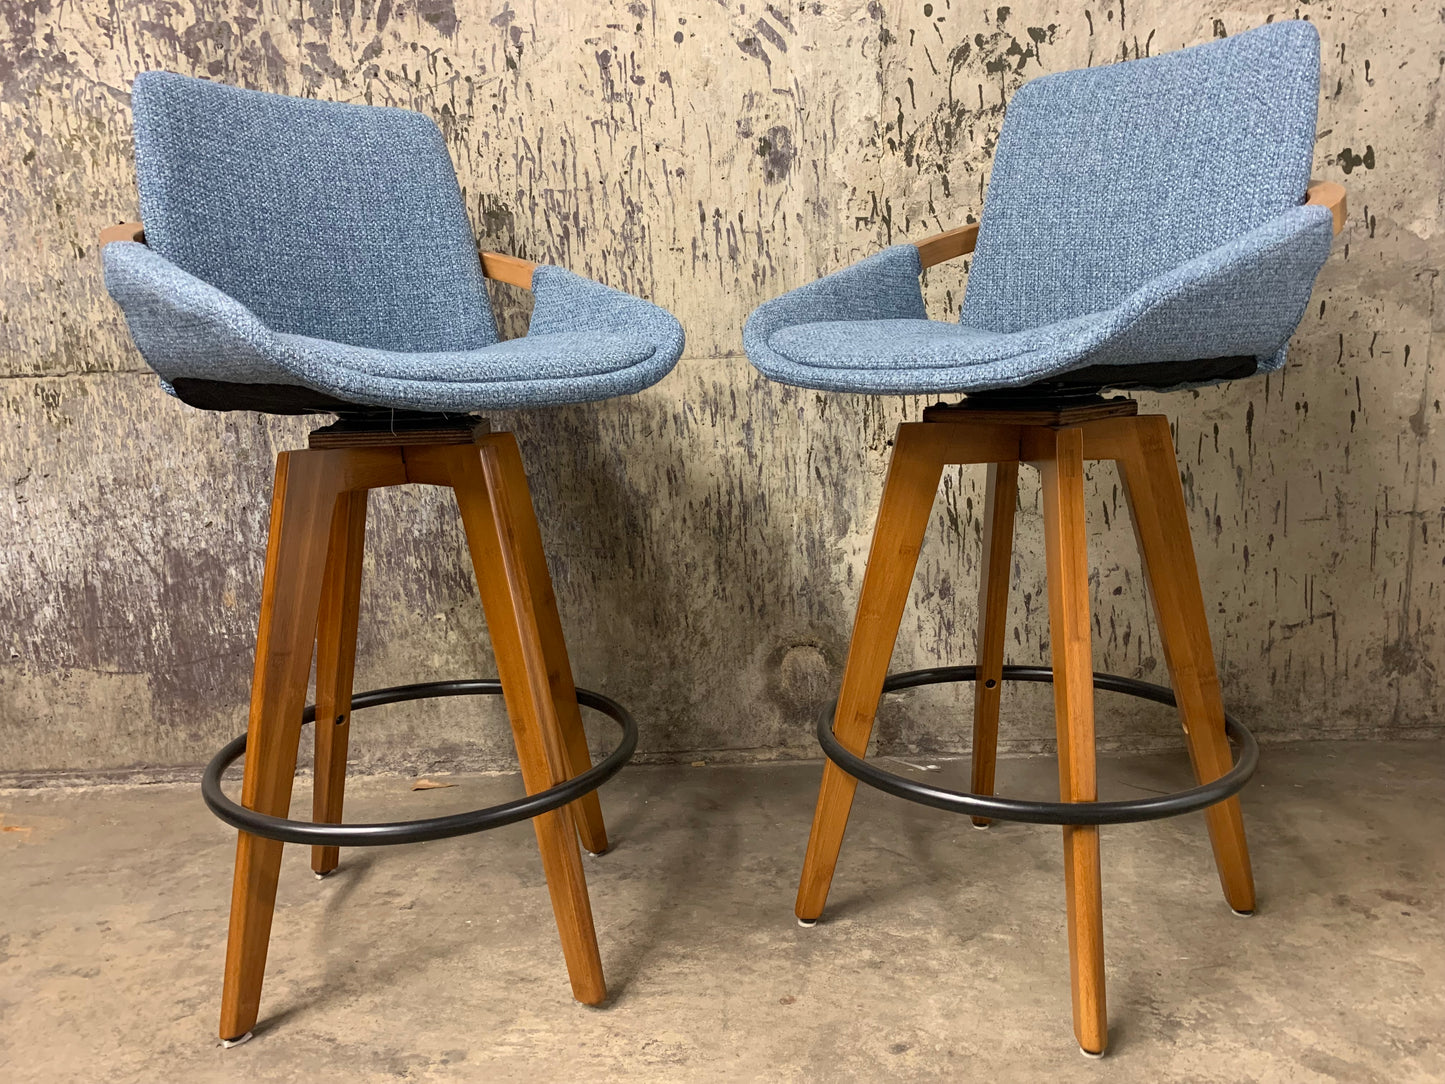 Blue Cosmo Counter Bar Stool Chairs - Set of 4